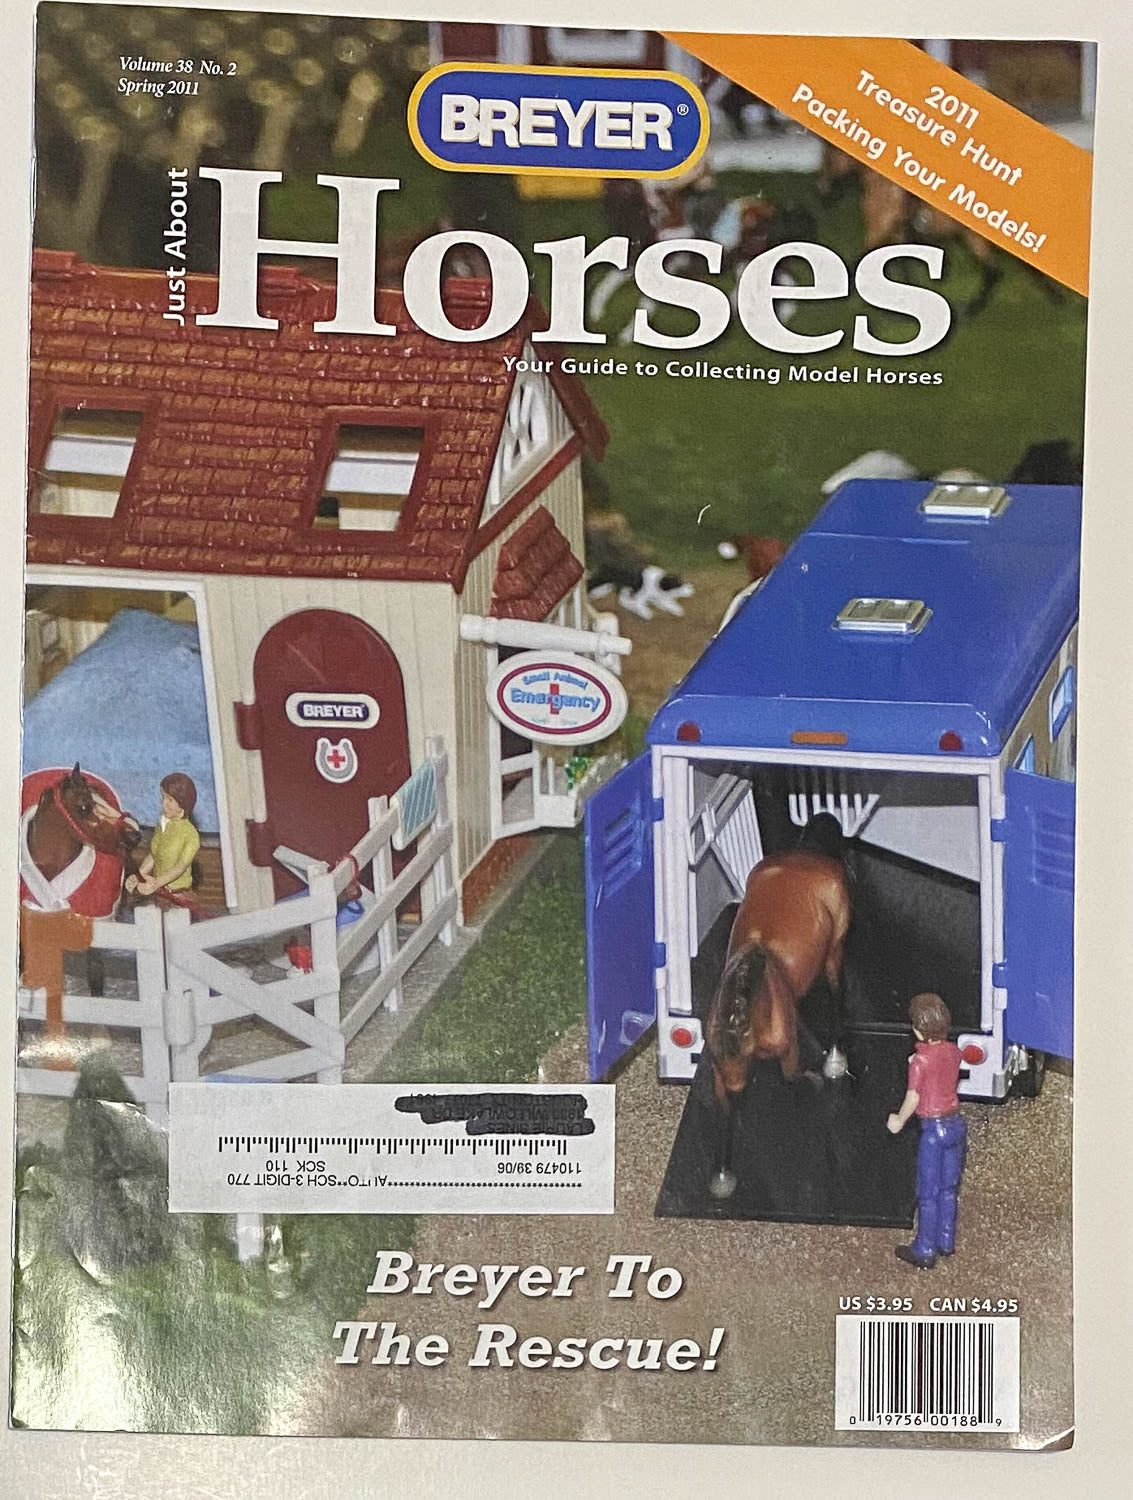 Just About Horses Magazine Vol. 38, No. 2, 2011 Spring (Sale for charity)